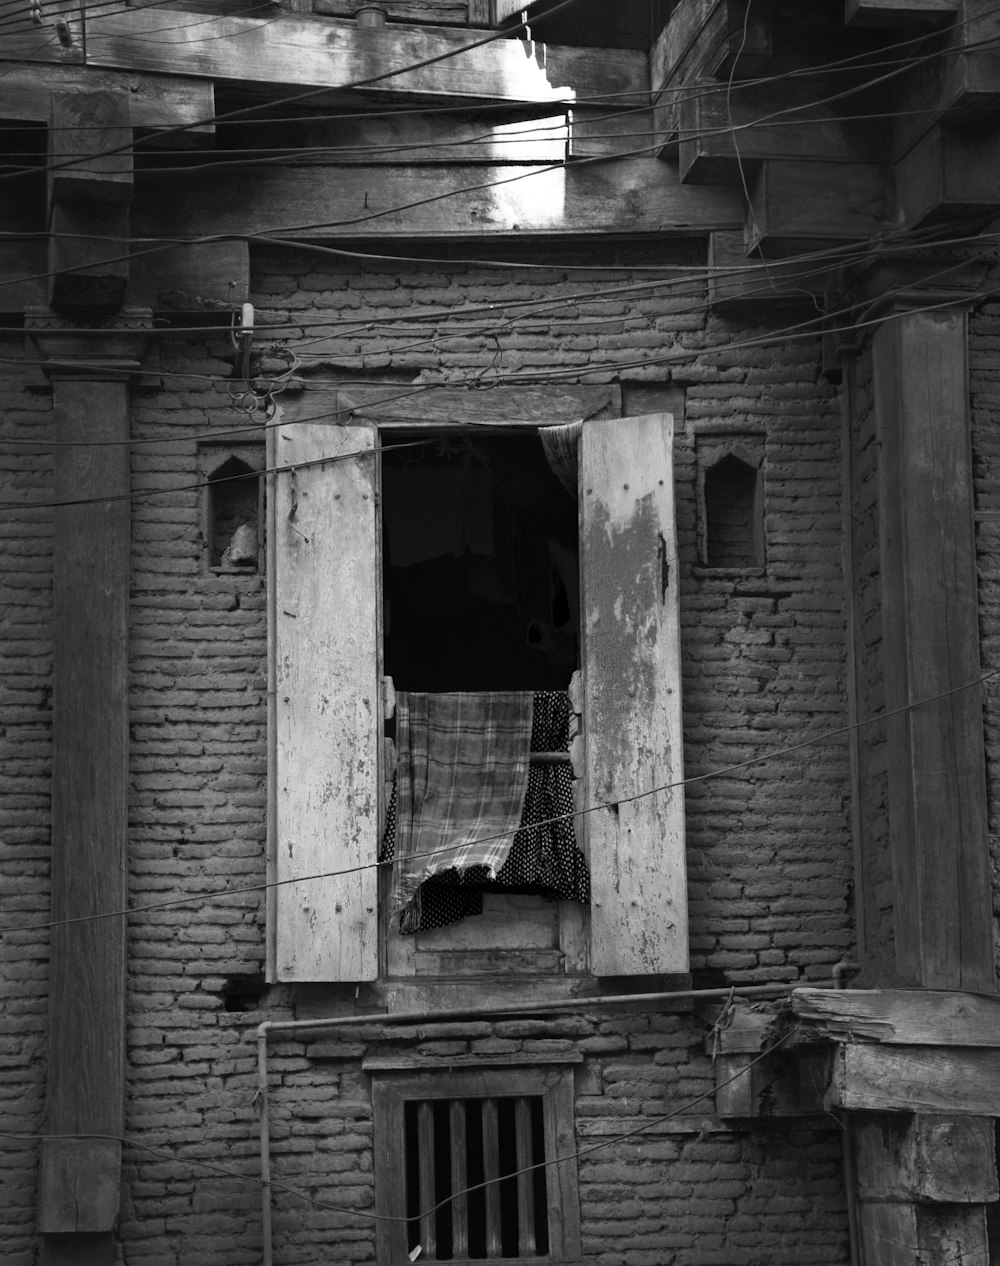 a black and white photo of an old building